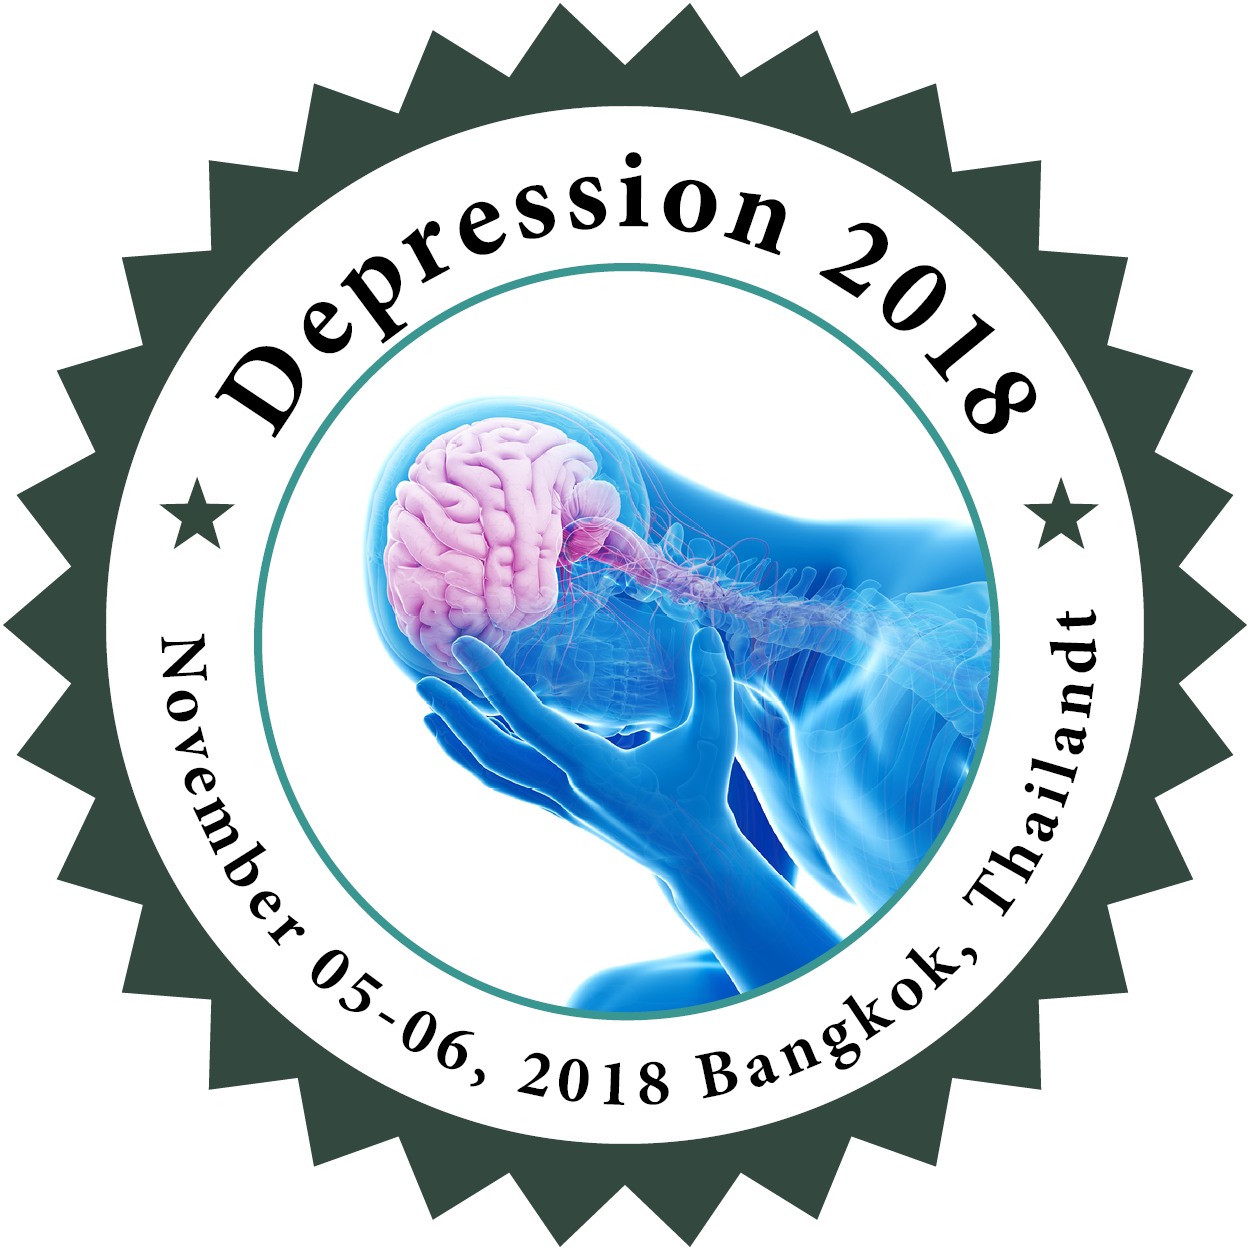 5th International Conference on Depression, Anxiety & Stress Management, Bangkok, Thailand